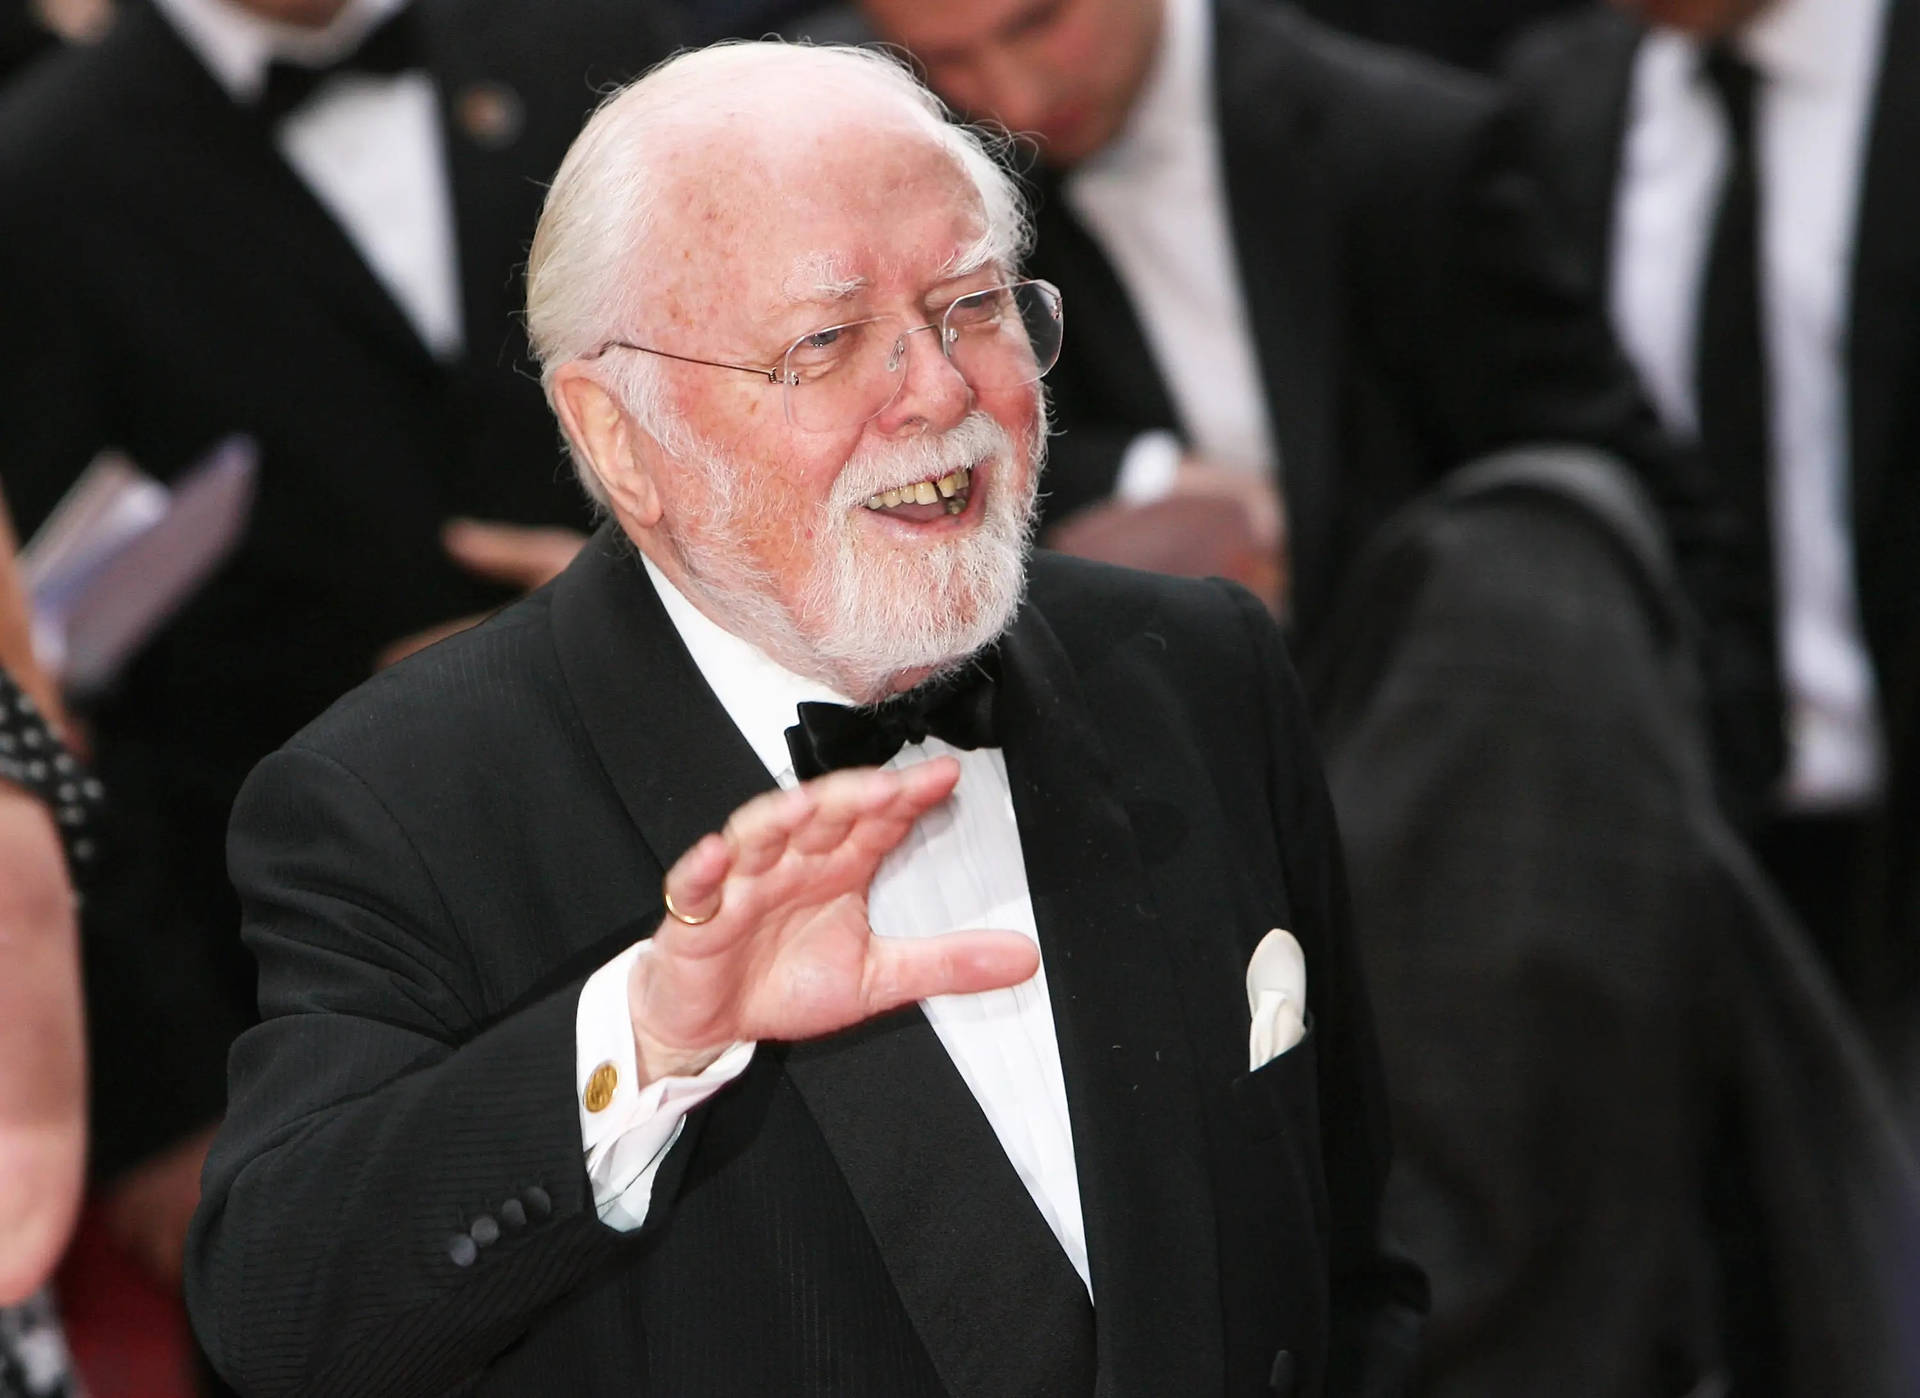 Caption: Richard Attenborough Enthusiastically Waving on the Red Carpet Wallpaper